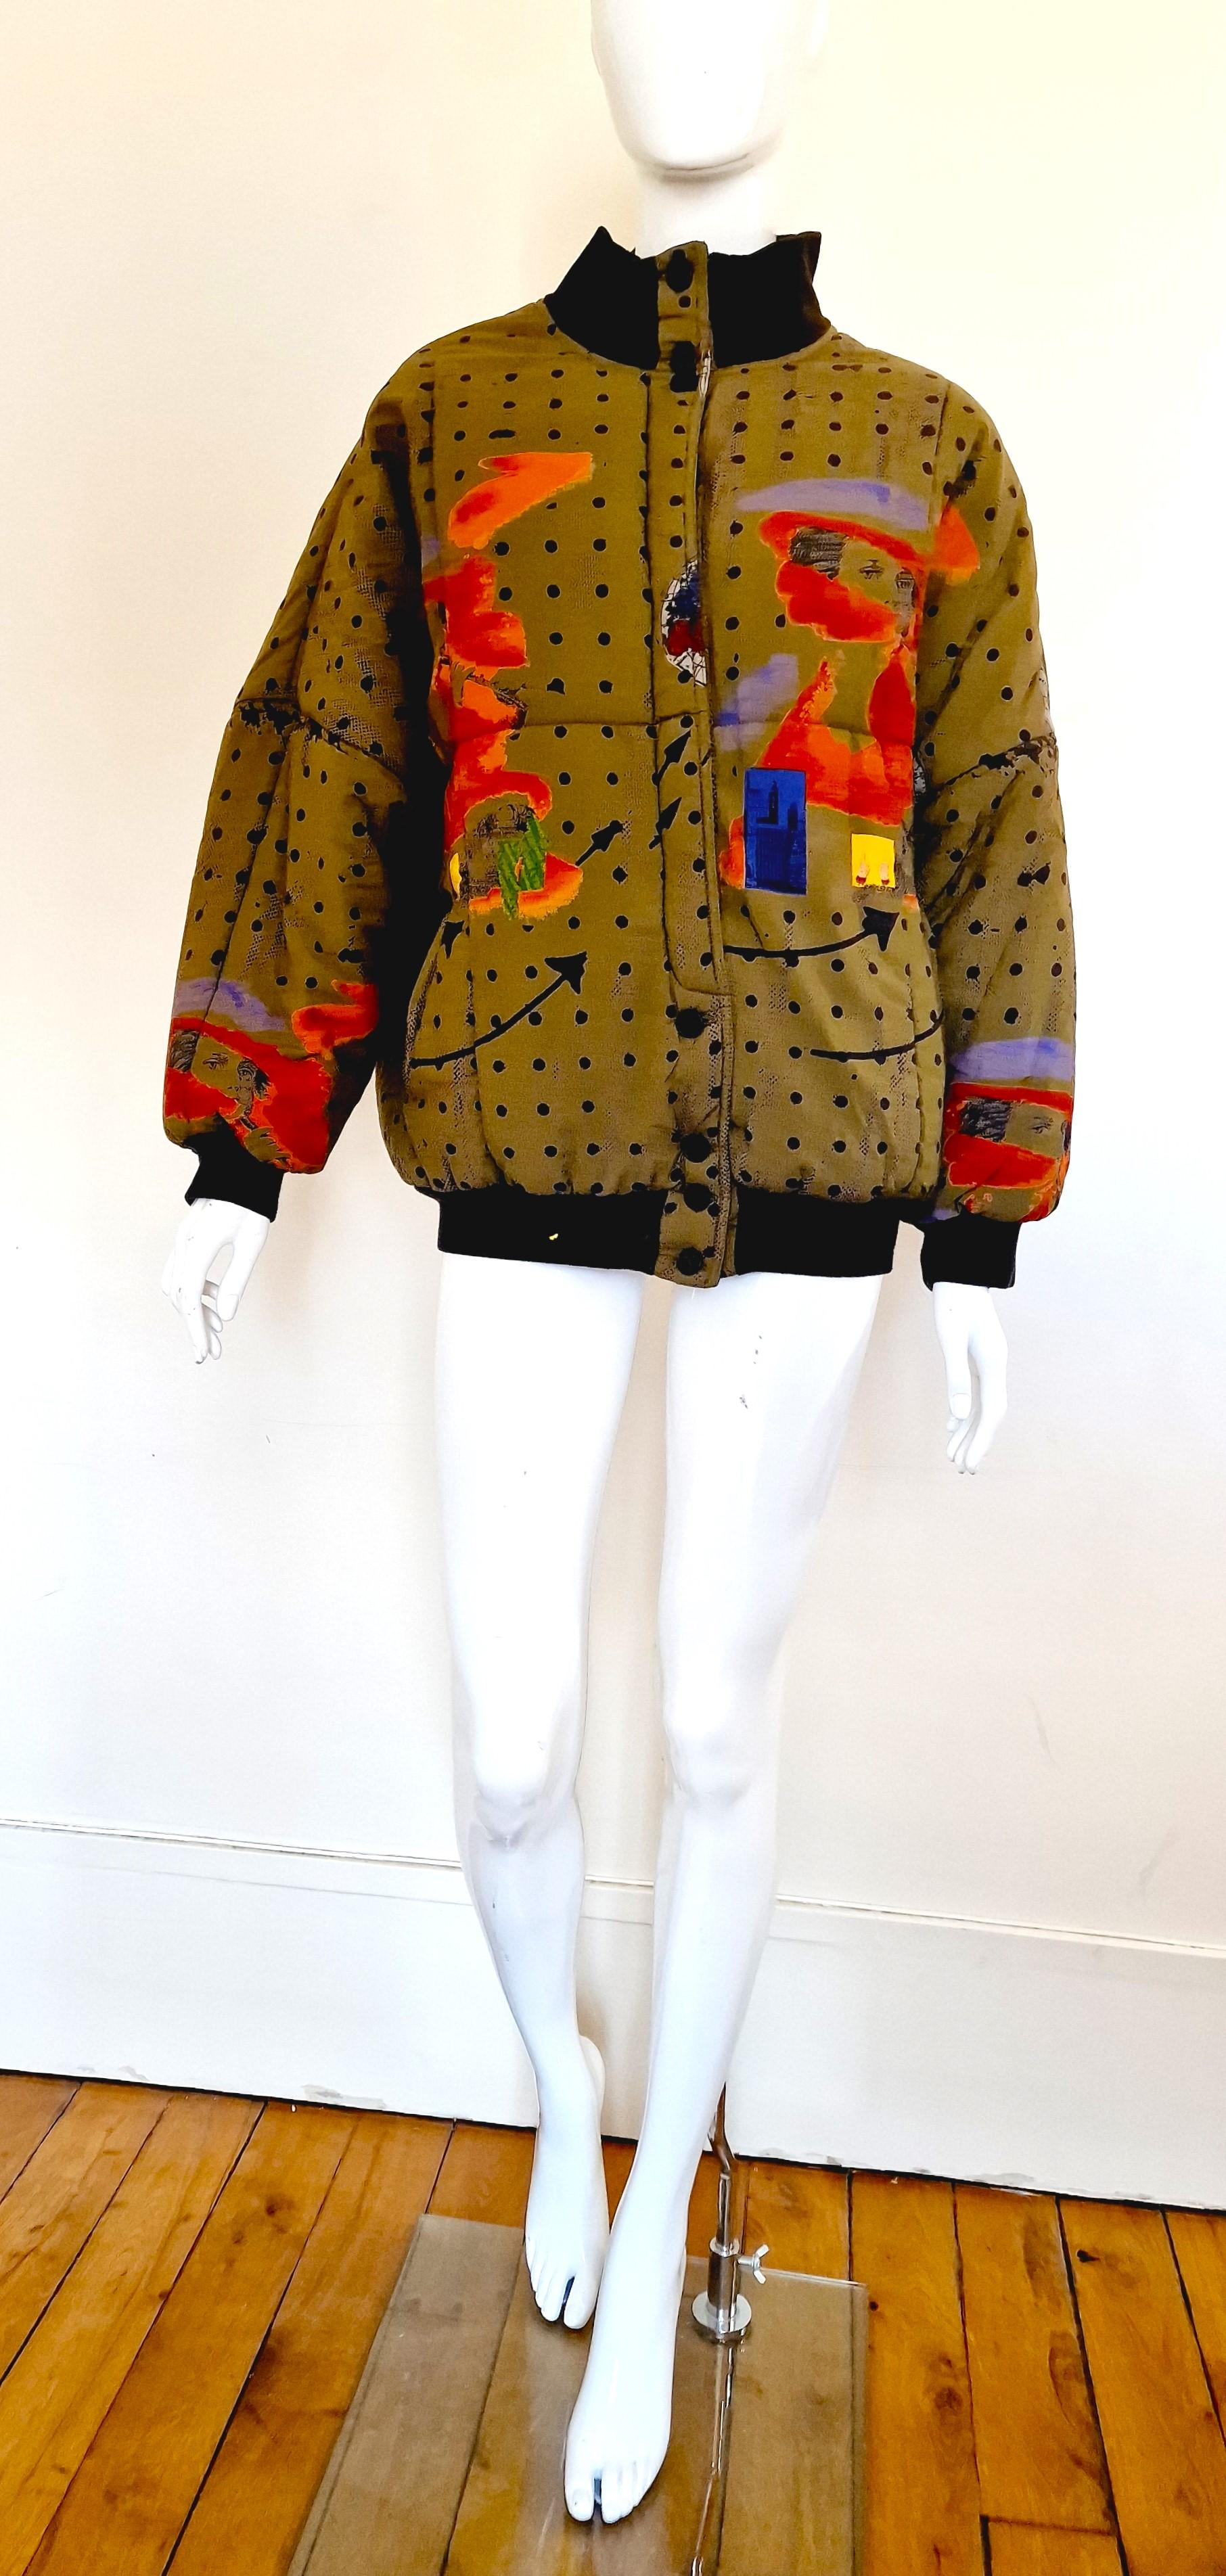 Bomber jacket by Elisabeth de SENNEVILLE!
From the 80s!

2 pockets on the front.
Bat sleeves.
Freat patter: Globe, Skyscapers, Woman with flute, Arrows.
Made in France!
VERY GOOD Condition!

SIZE
Marked size: large.
Woman: It fits large to XL.
Men: